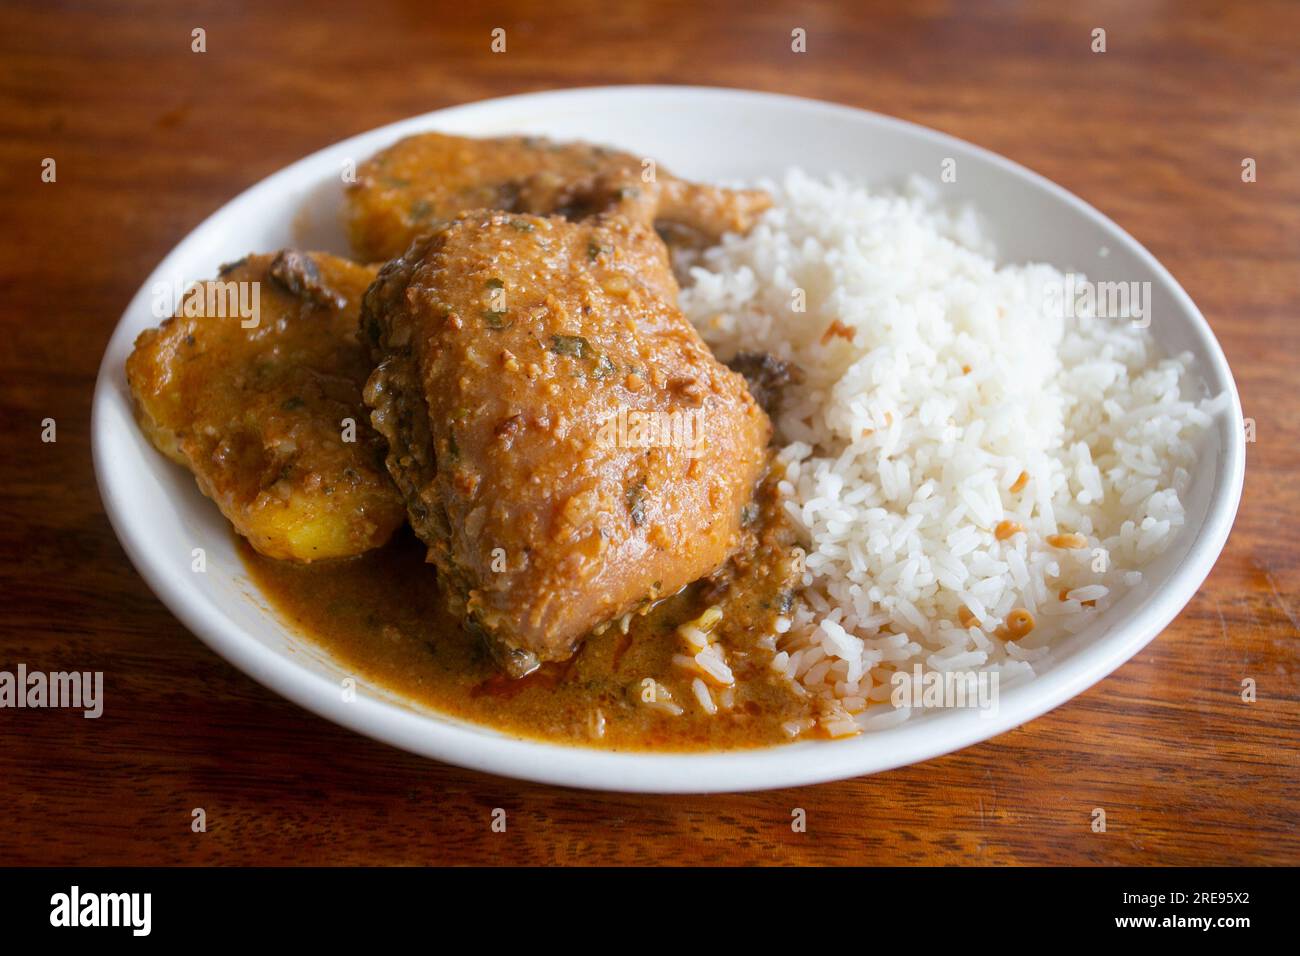 Pepian de cuy is a hearty stew made with guinea pig meat and corn and seasoned with peppers, onions and peanuts. Stock Photo